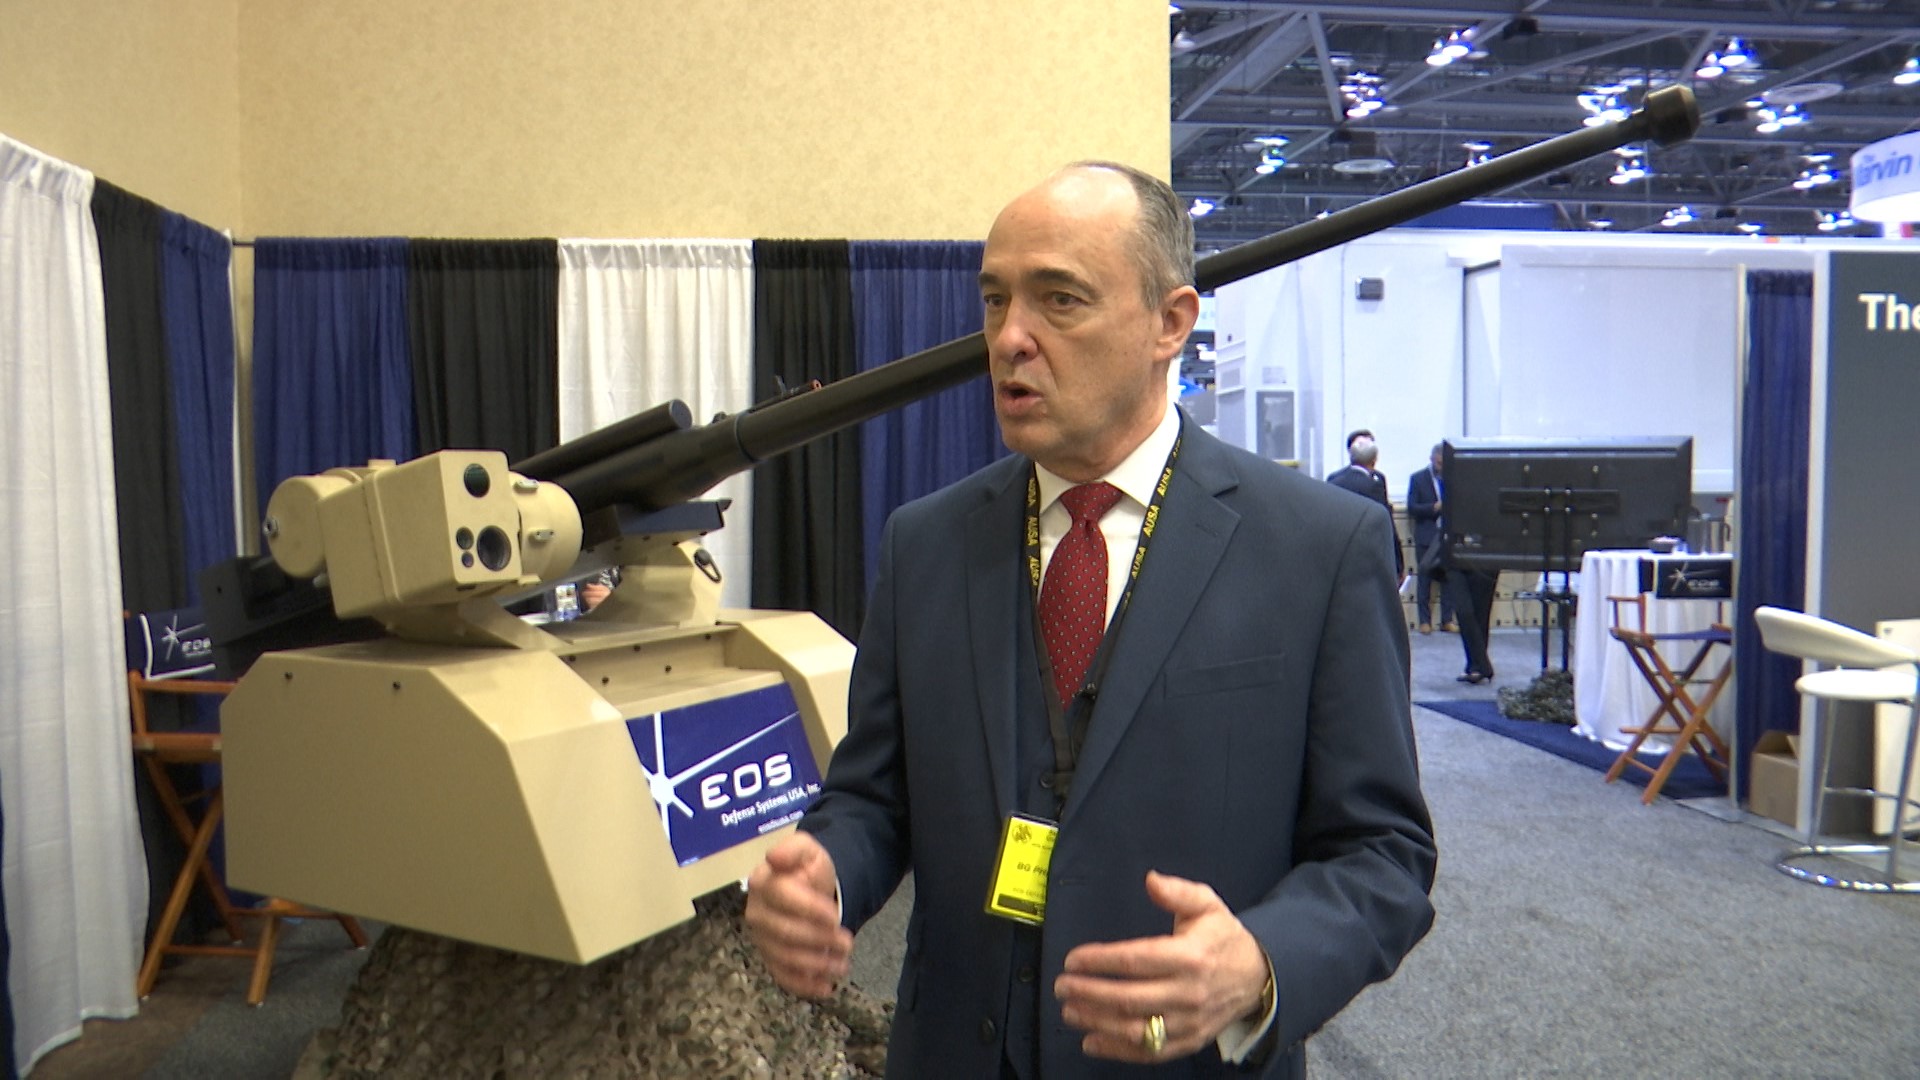 EOS showed off its new technology at the Association of the United States Army's Global Force Symposium.